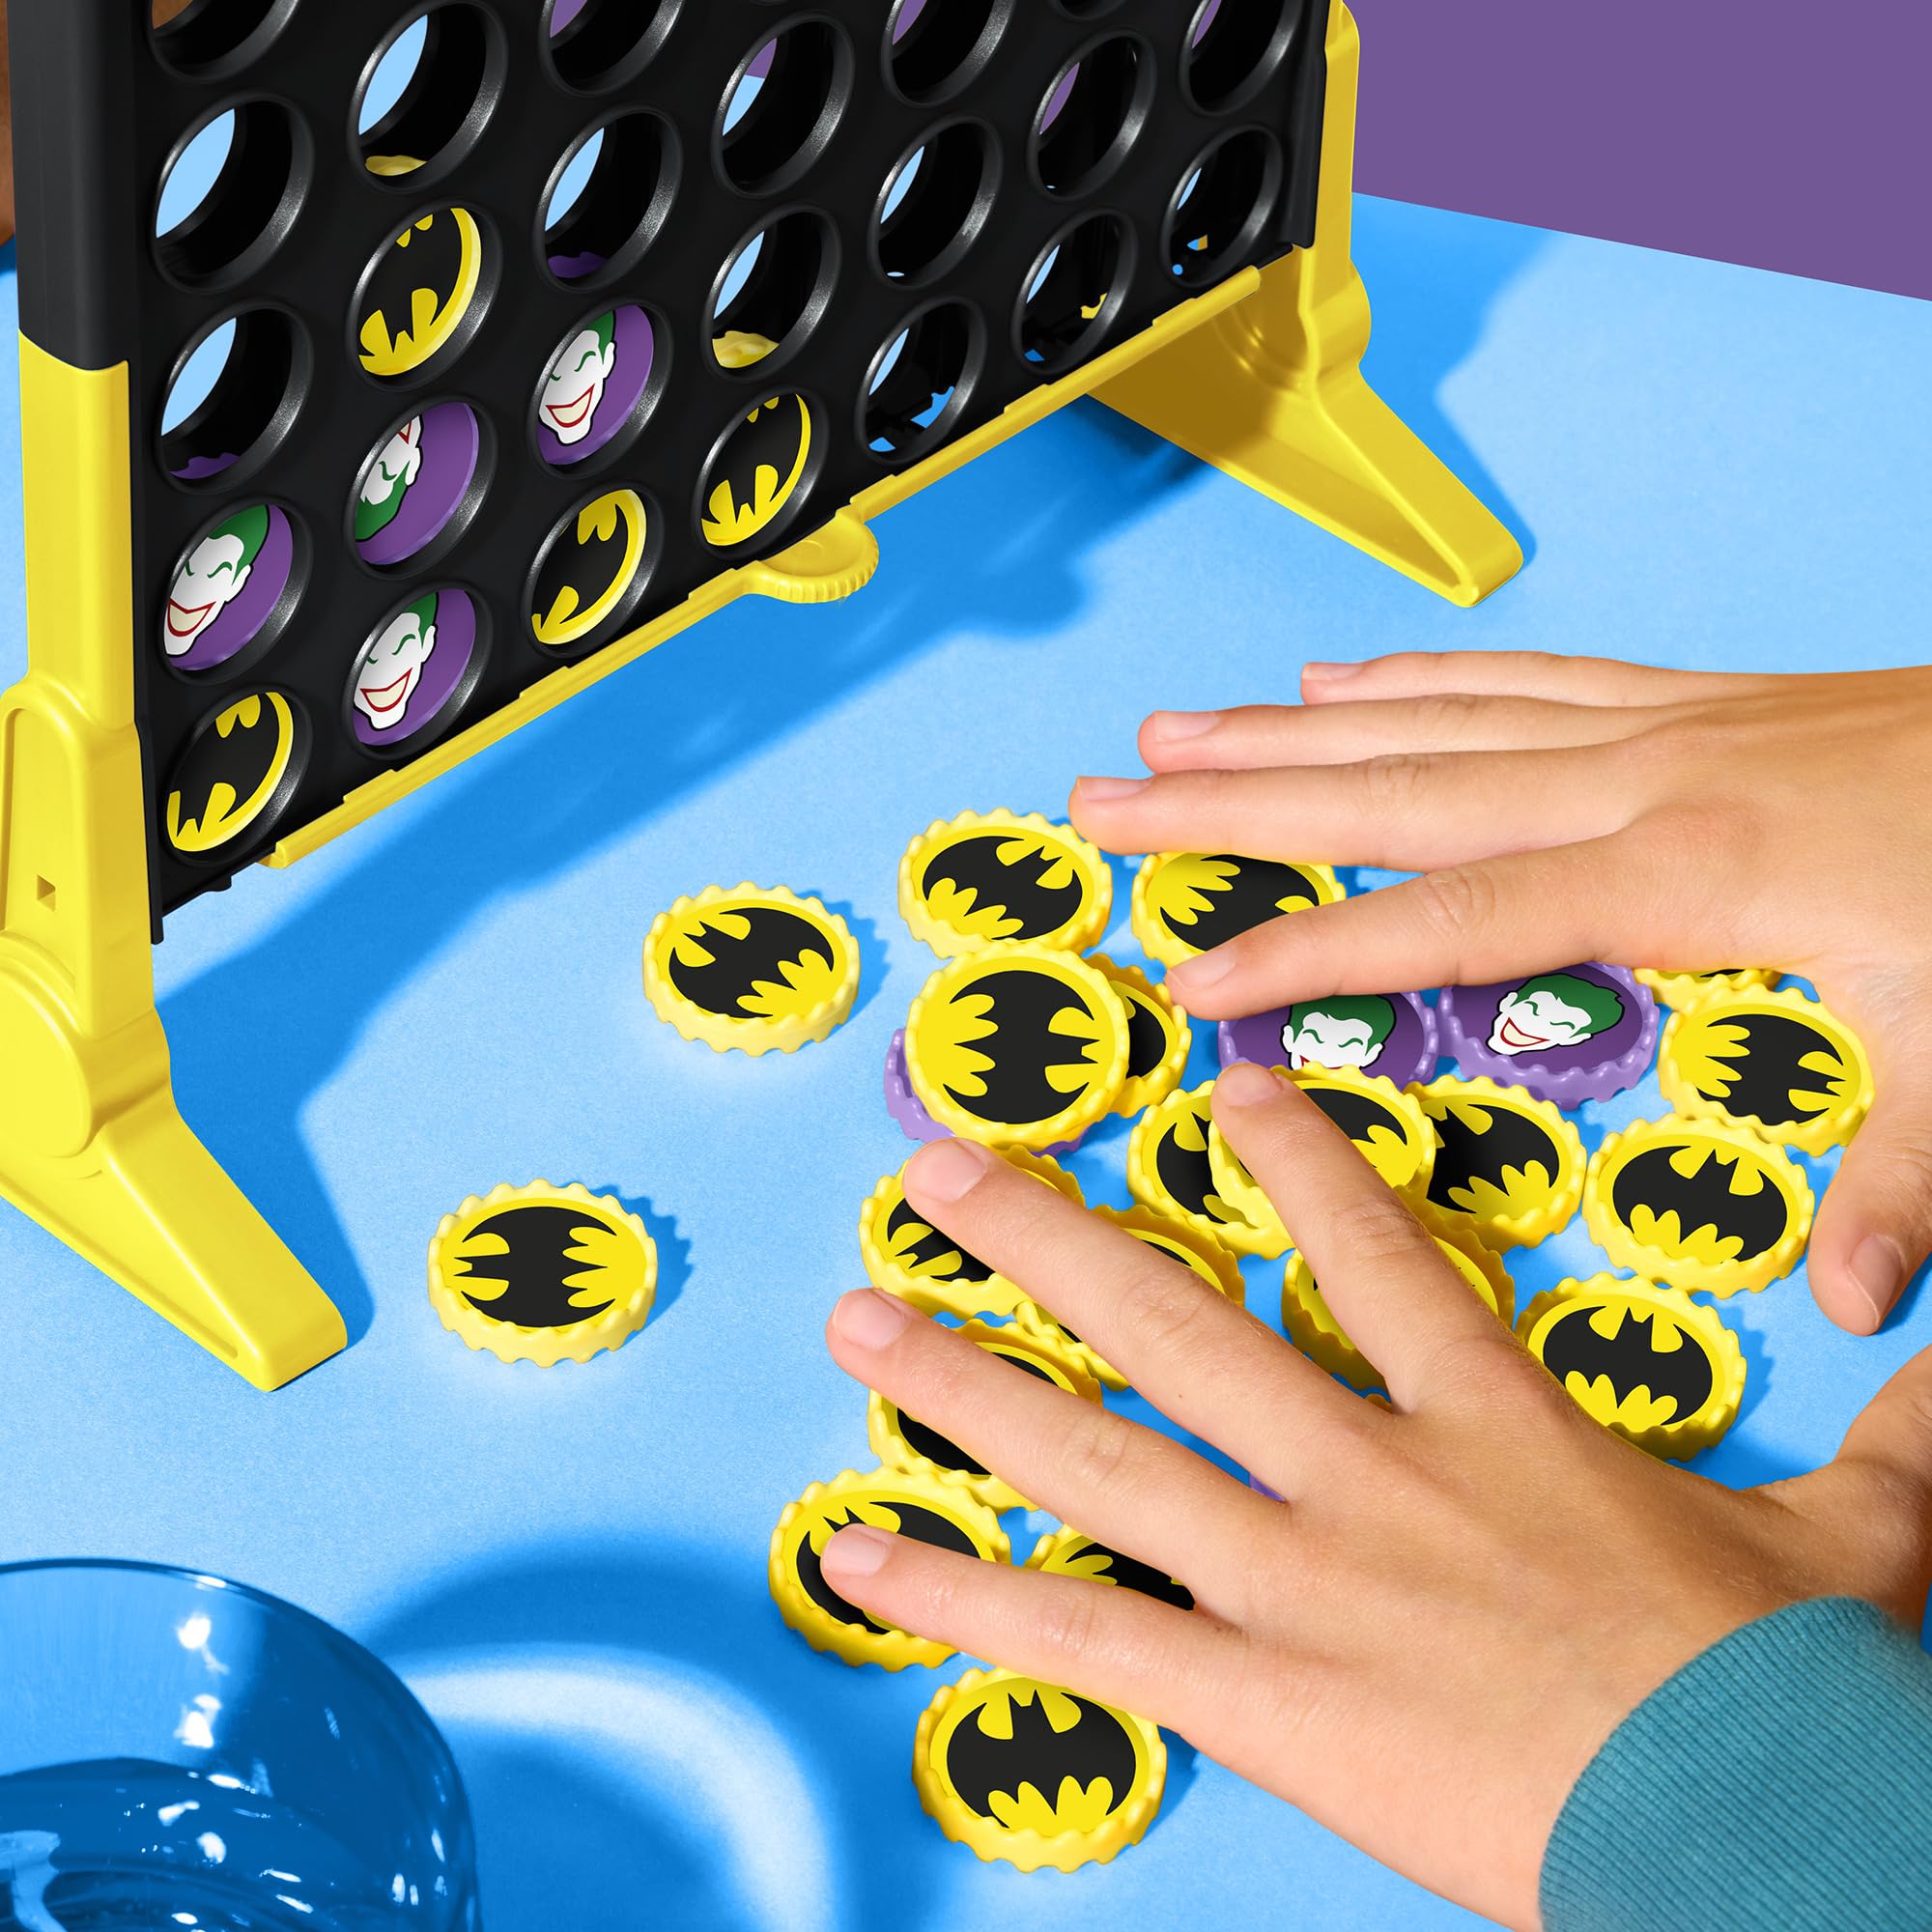 Connect 4 Batman Game | Batman-Themed 4 in a Row Game | Ages 6 and Up| For 2 Players | Strategy Board Games for Kids and Families (Amazon Exclusive)